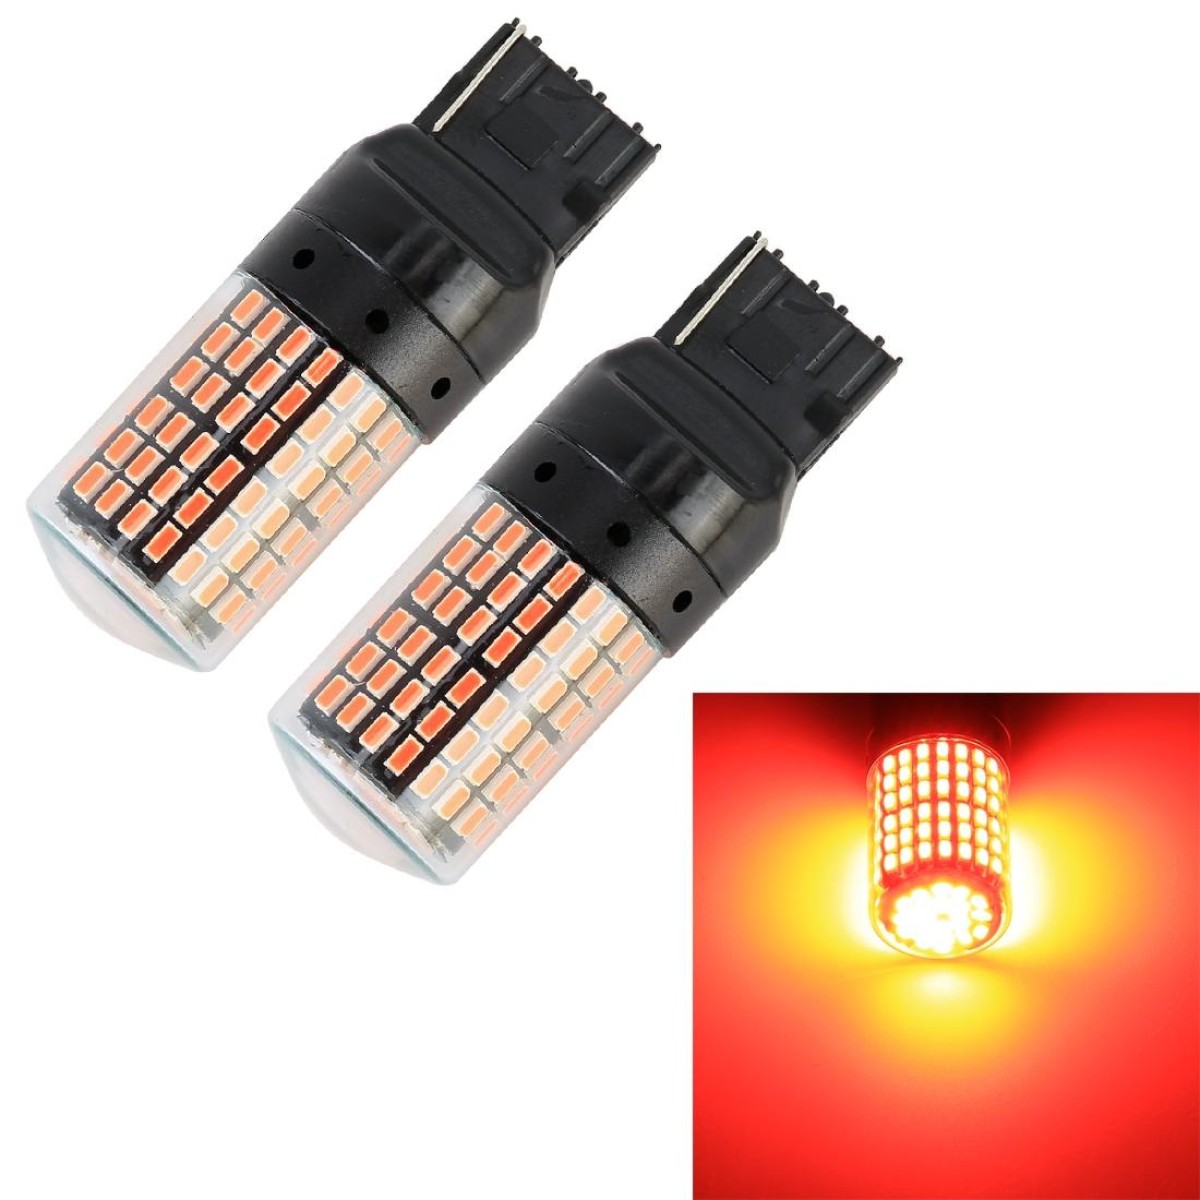 2 PCS T20 / 7440 DC12V / 18W / 1080LM Car Auto Turn Lights with SMD-3014 Lamps (Red Light)